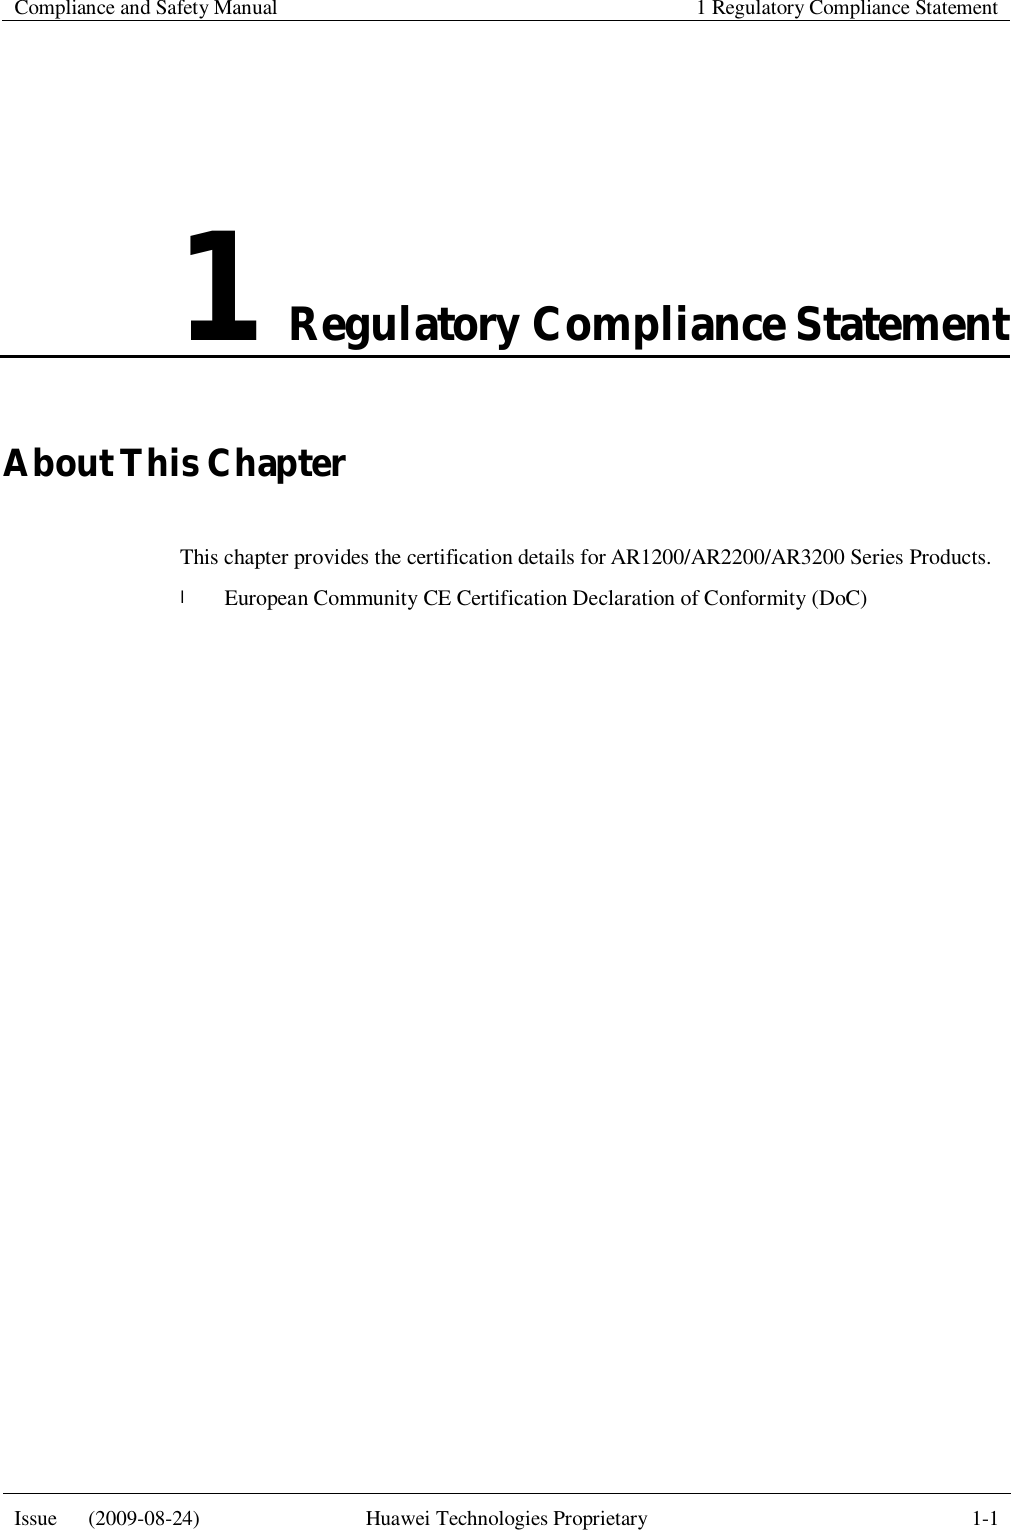  Compliance and Safety Manual  1 Regulatory Compliance Statement  Issue   (2009-08-24)  Huawei Technologies Proprietary  1-1  1 Regulatory Compliance Statement About This Chapter This chapter provides the certification details for AR1200/AR2200/AR3200 Series Products. l European Community CE Certification Declaration of Conformity (DoC) 